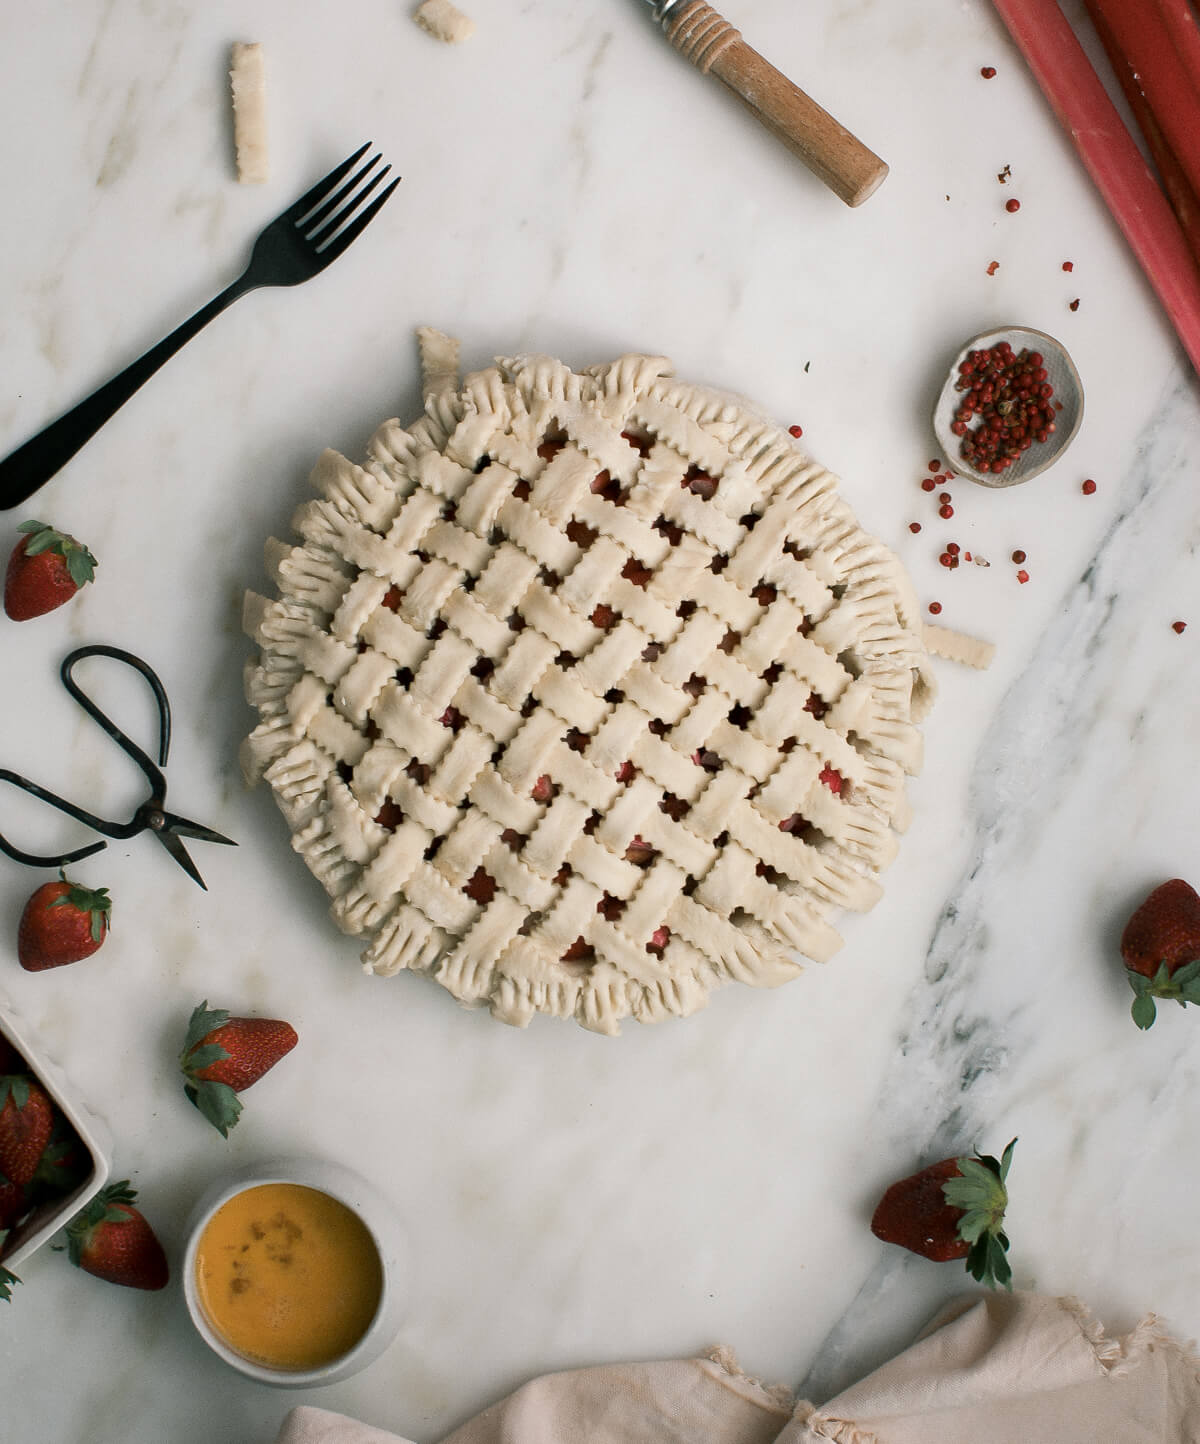 Unbaked pie with a lattice pie crust and pie ingredients all around.